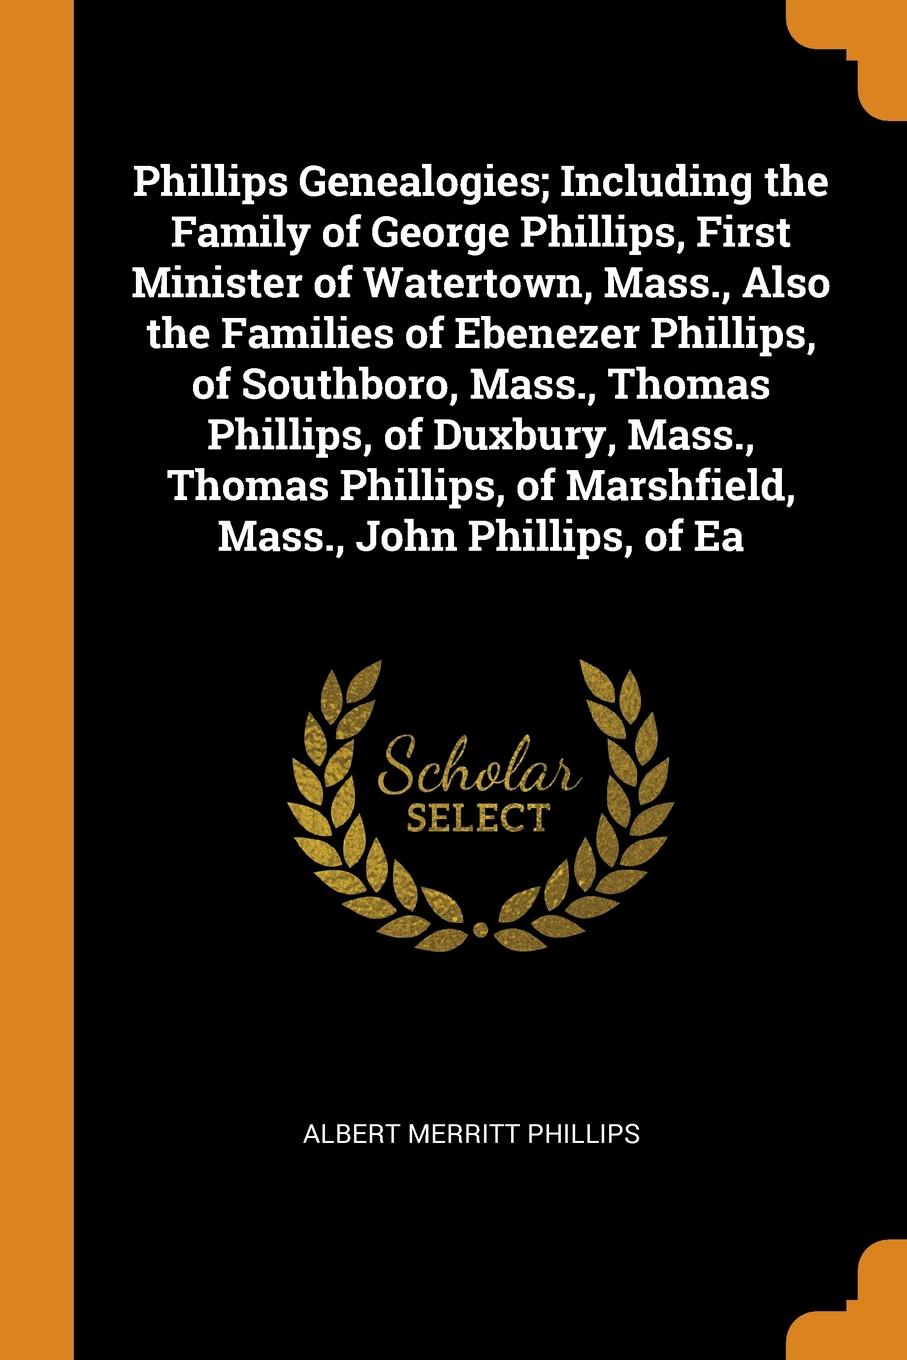 Phillips Genealogies; Including the Family of George Phillips, First Minister of Watertown, Mass., Also the Families of Ebenezer Phillips, of Southboro, Mass., Thomas Phillips, of Duxbury, Mass., Thomas Phillips, of Marshfield, Mass., John Phillip...